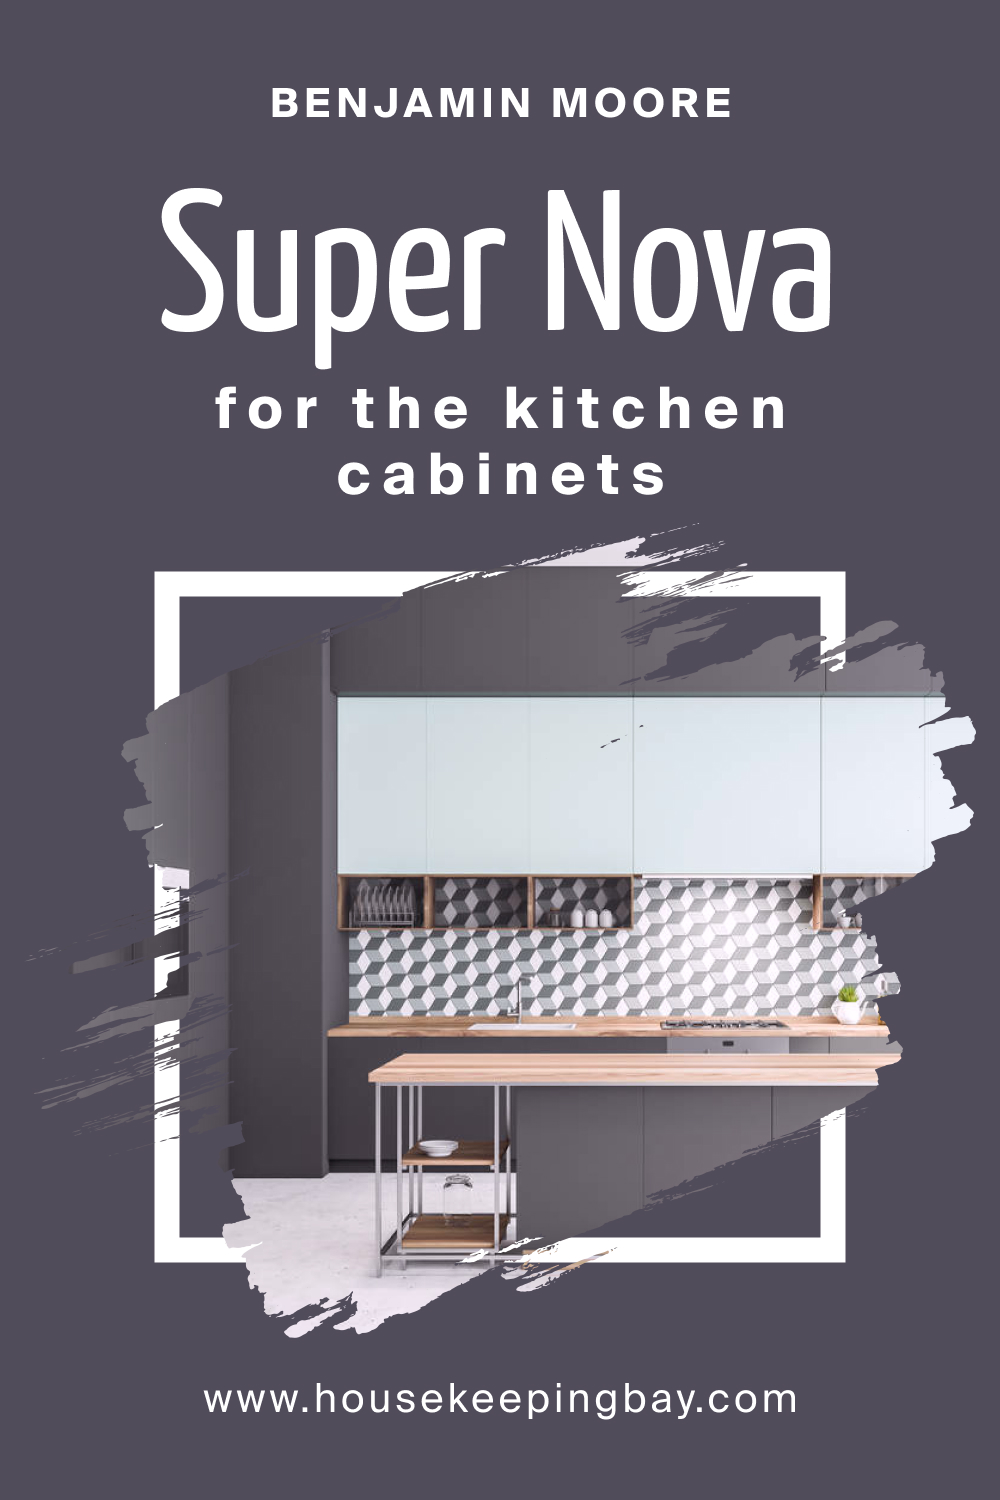 How to Use Super Nova 1414 on the Kitchen Cabinets?